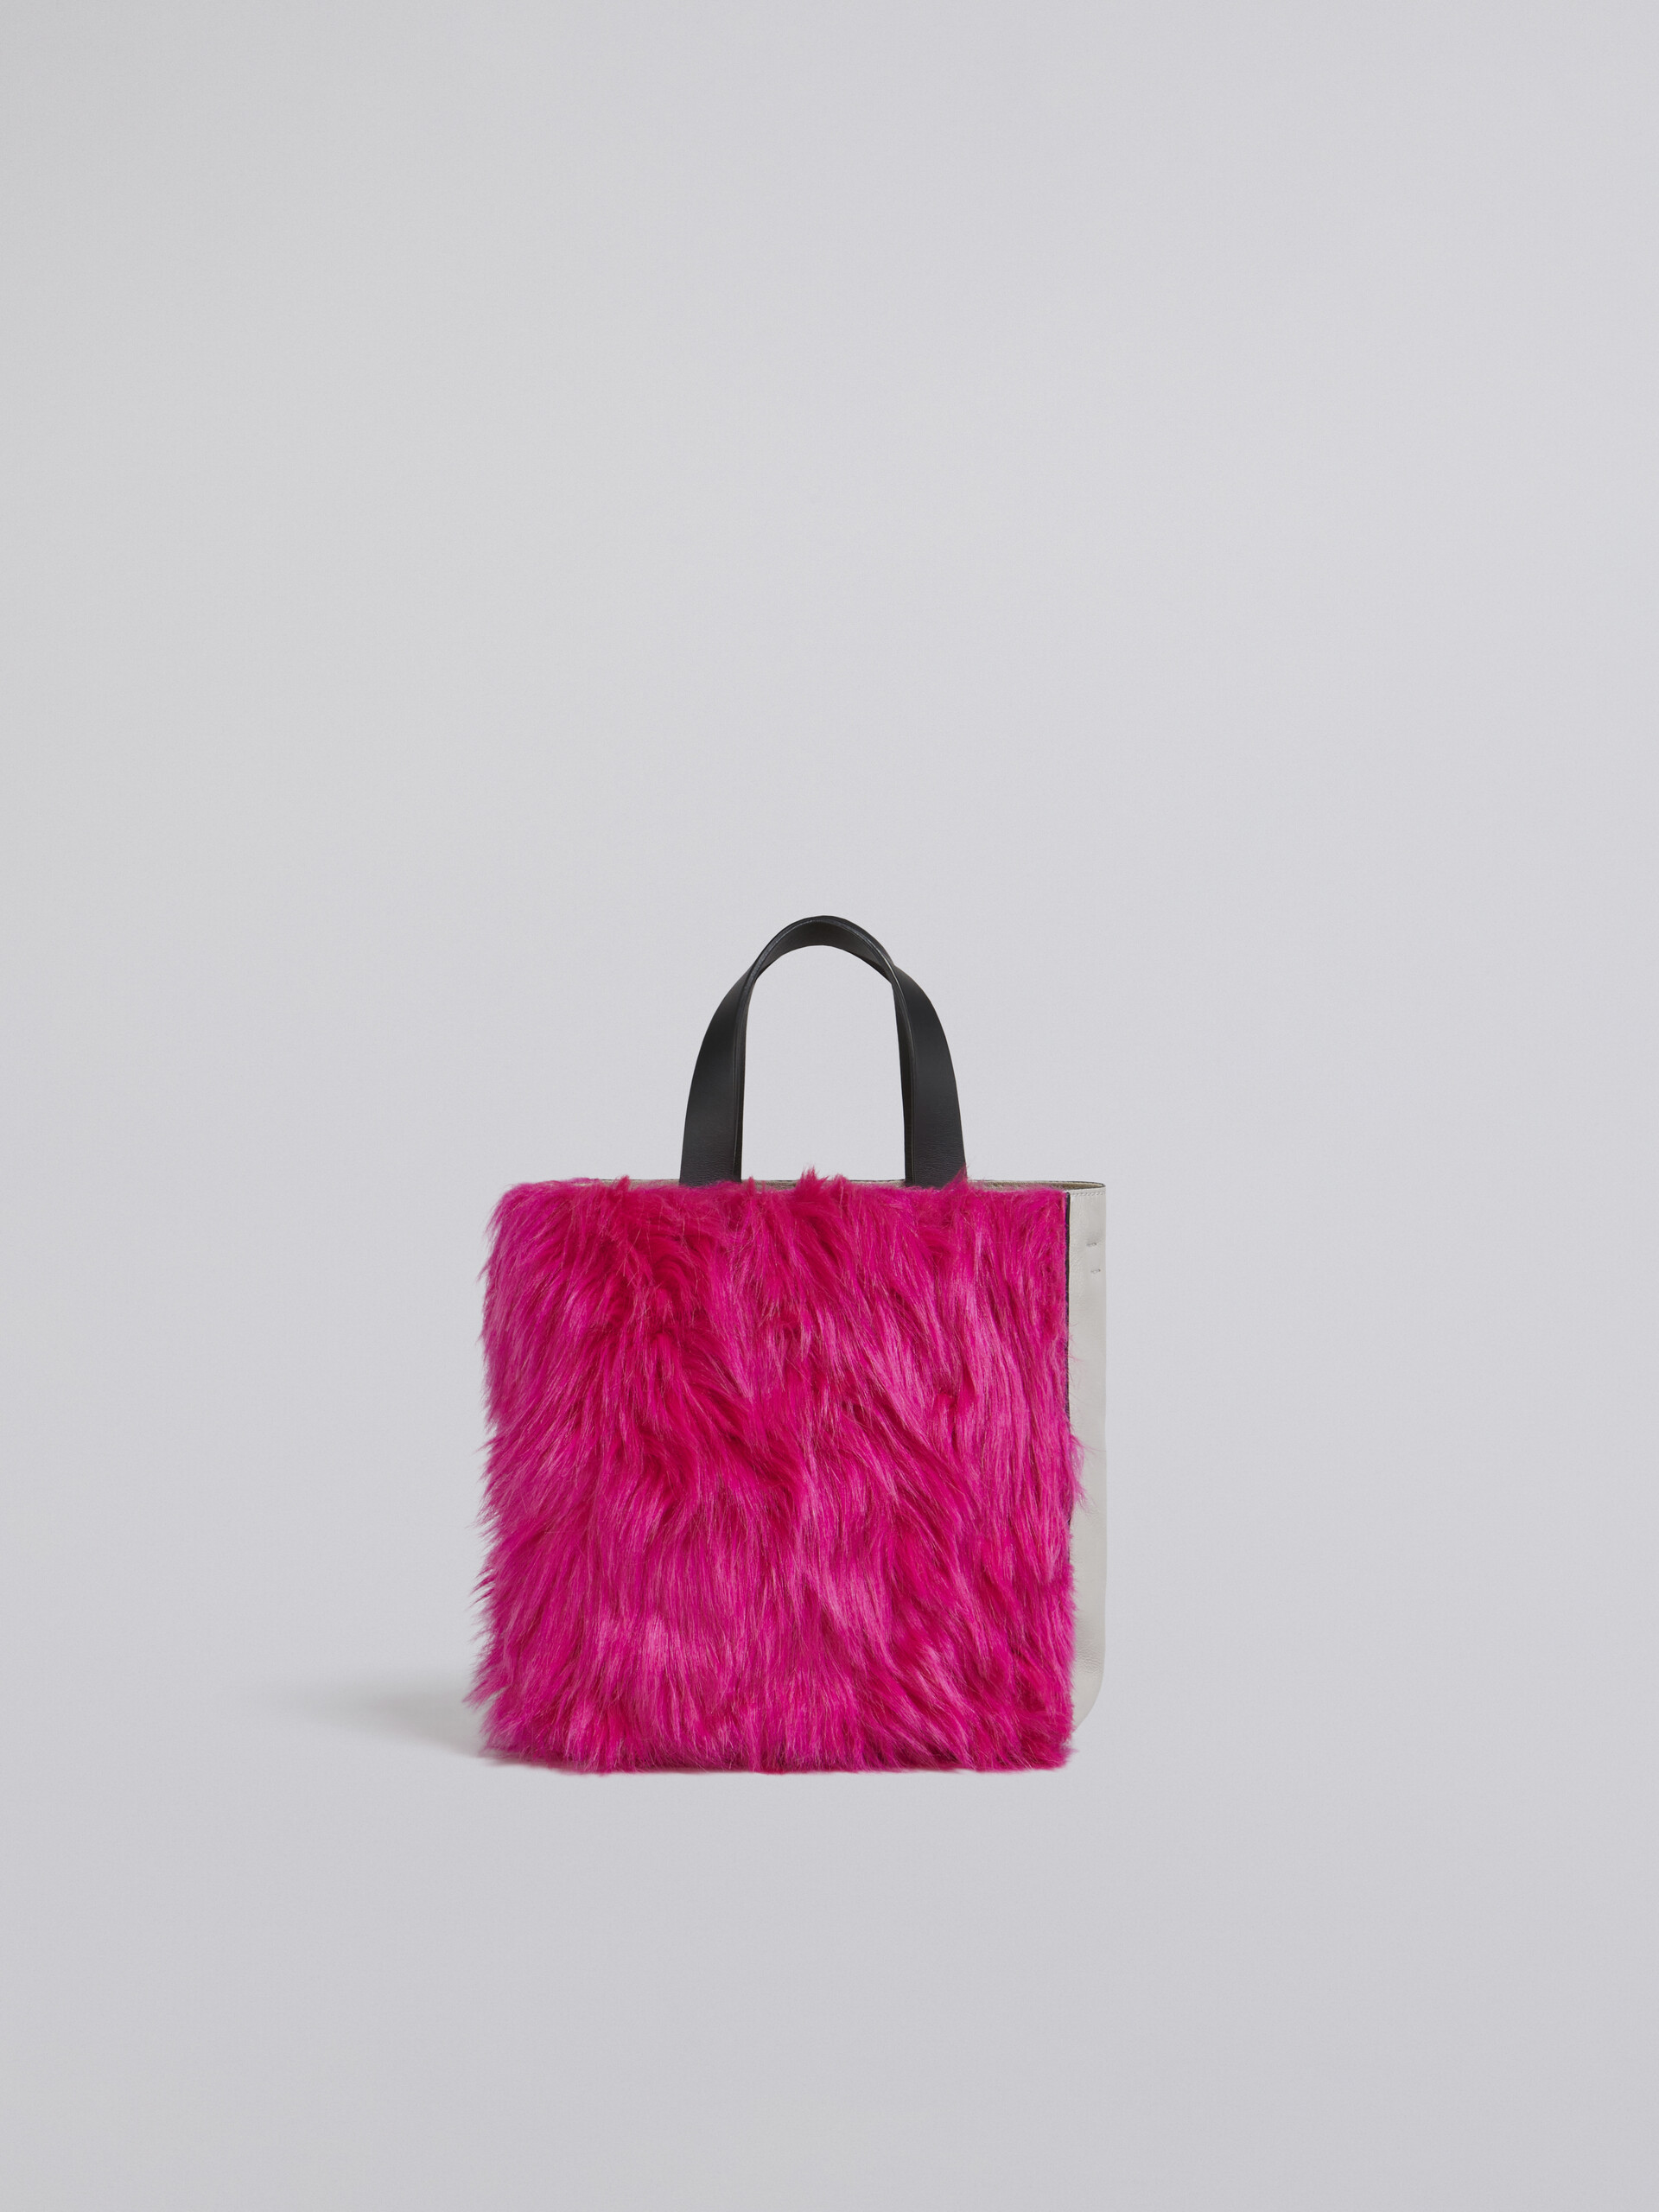 Teddy and calf leather MUSEO SOFT bag - Shopping Bags - Image 1